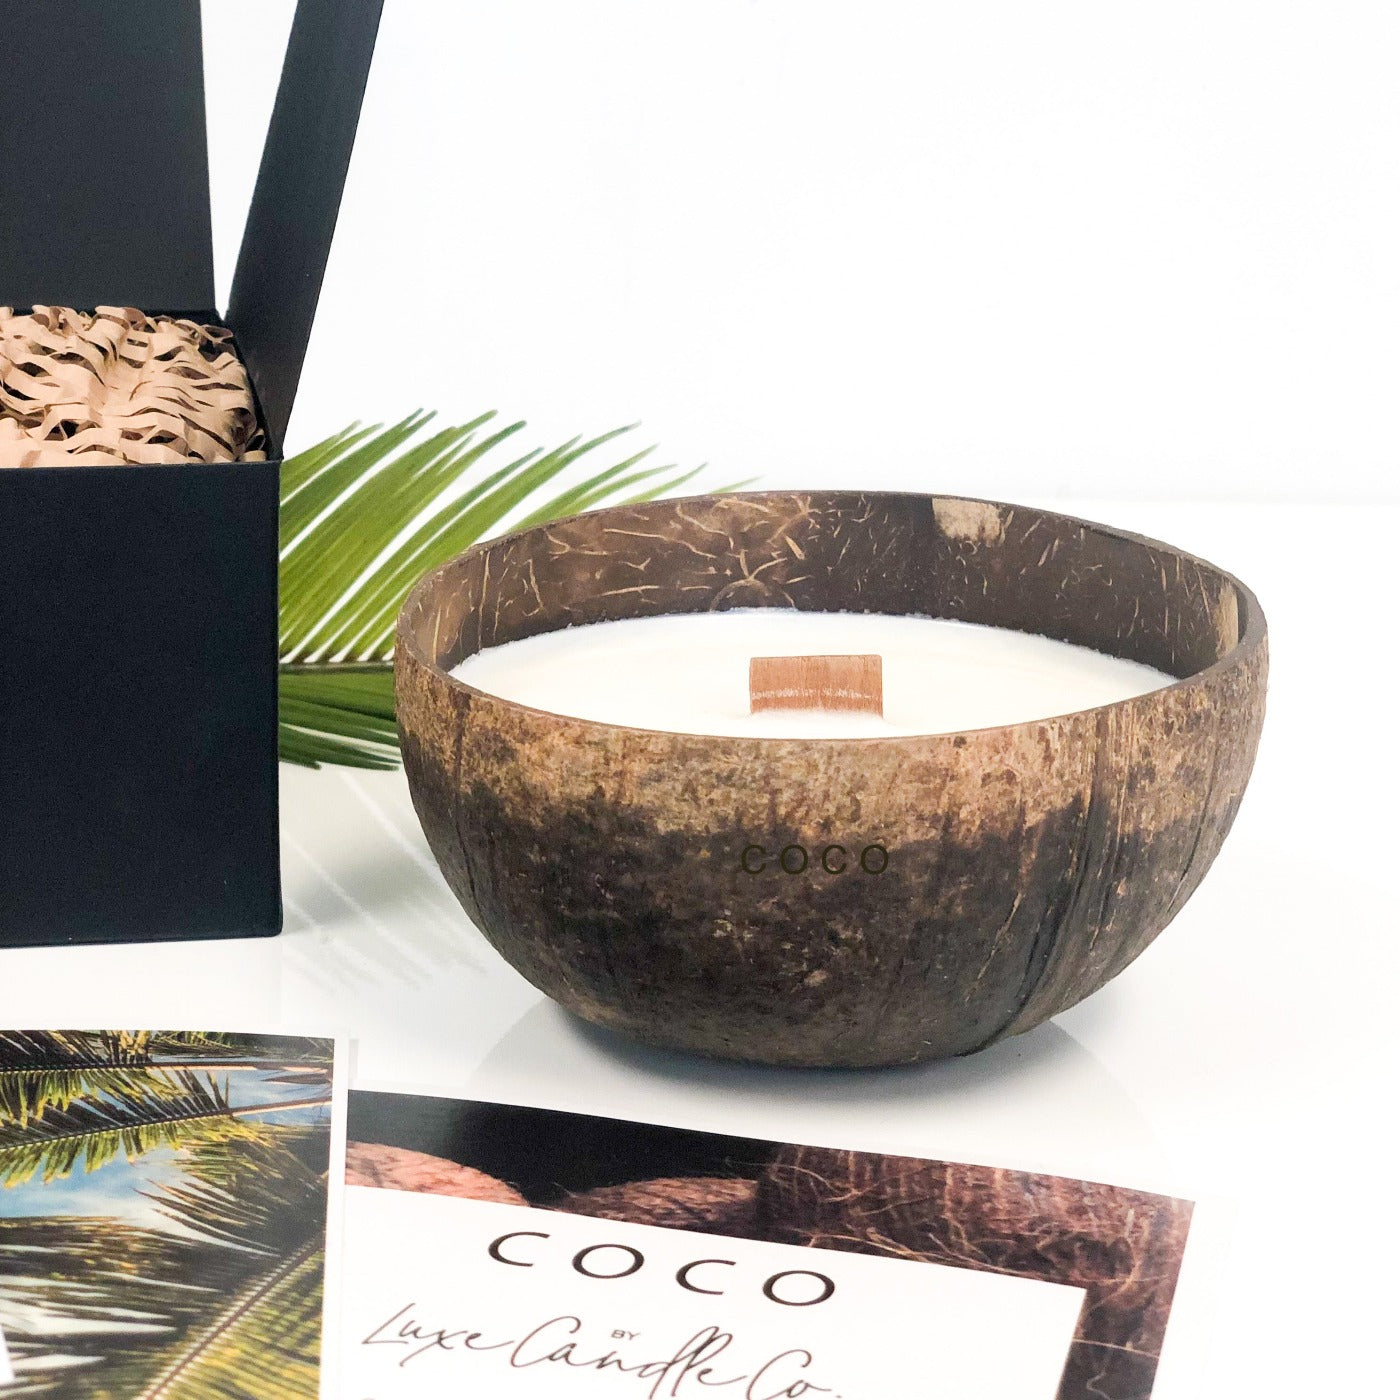 Coconut gift set with wood wick coconut bowl | Best gift idea for coconut lover UK